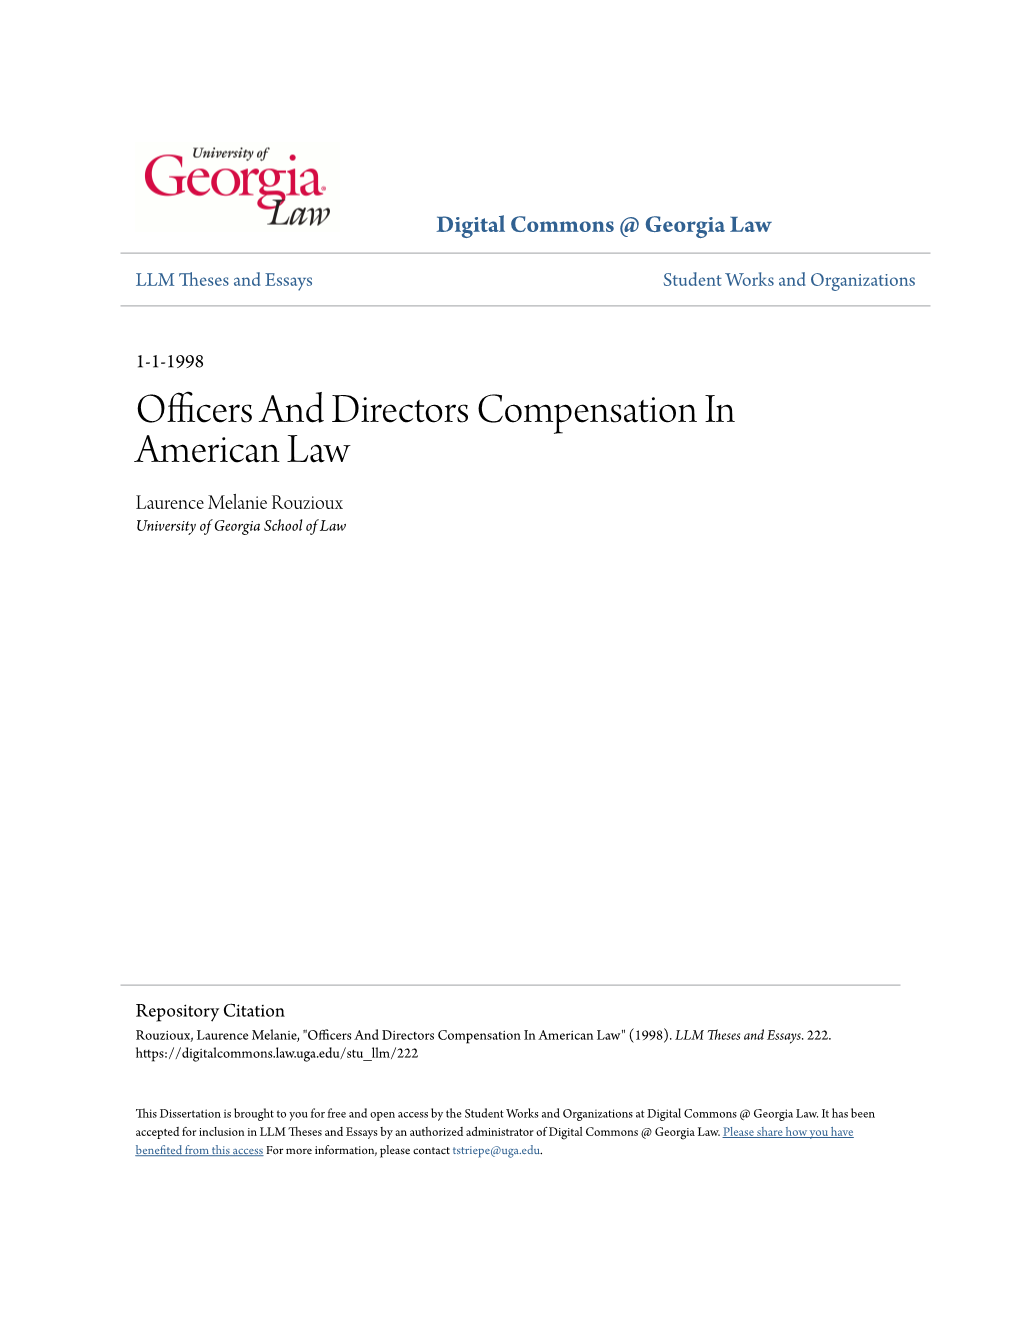 Officers and Directors Compensation in American Law Laurence Melanie Rouzioux University of Georgia School of Law